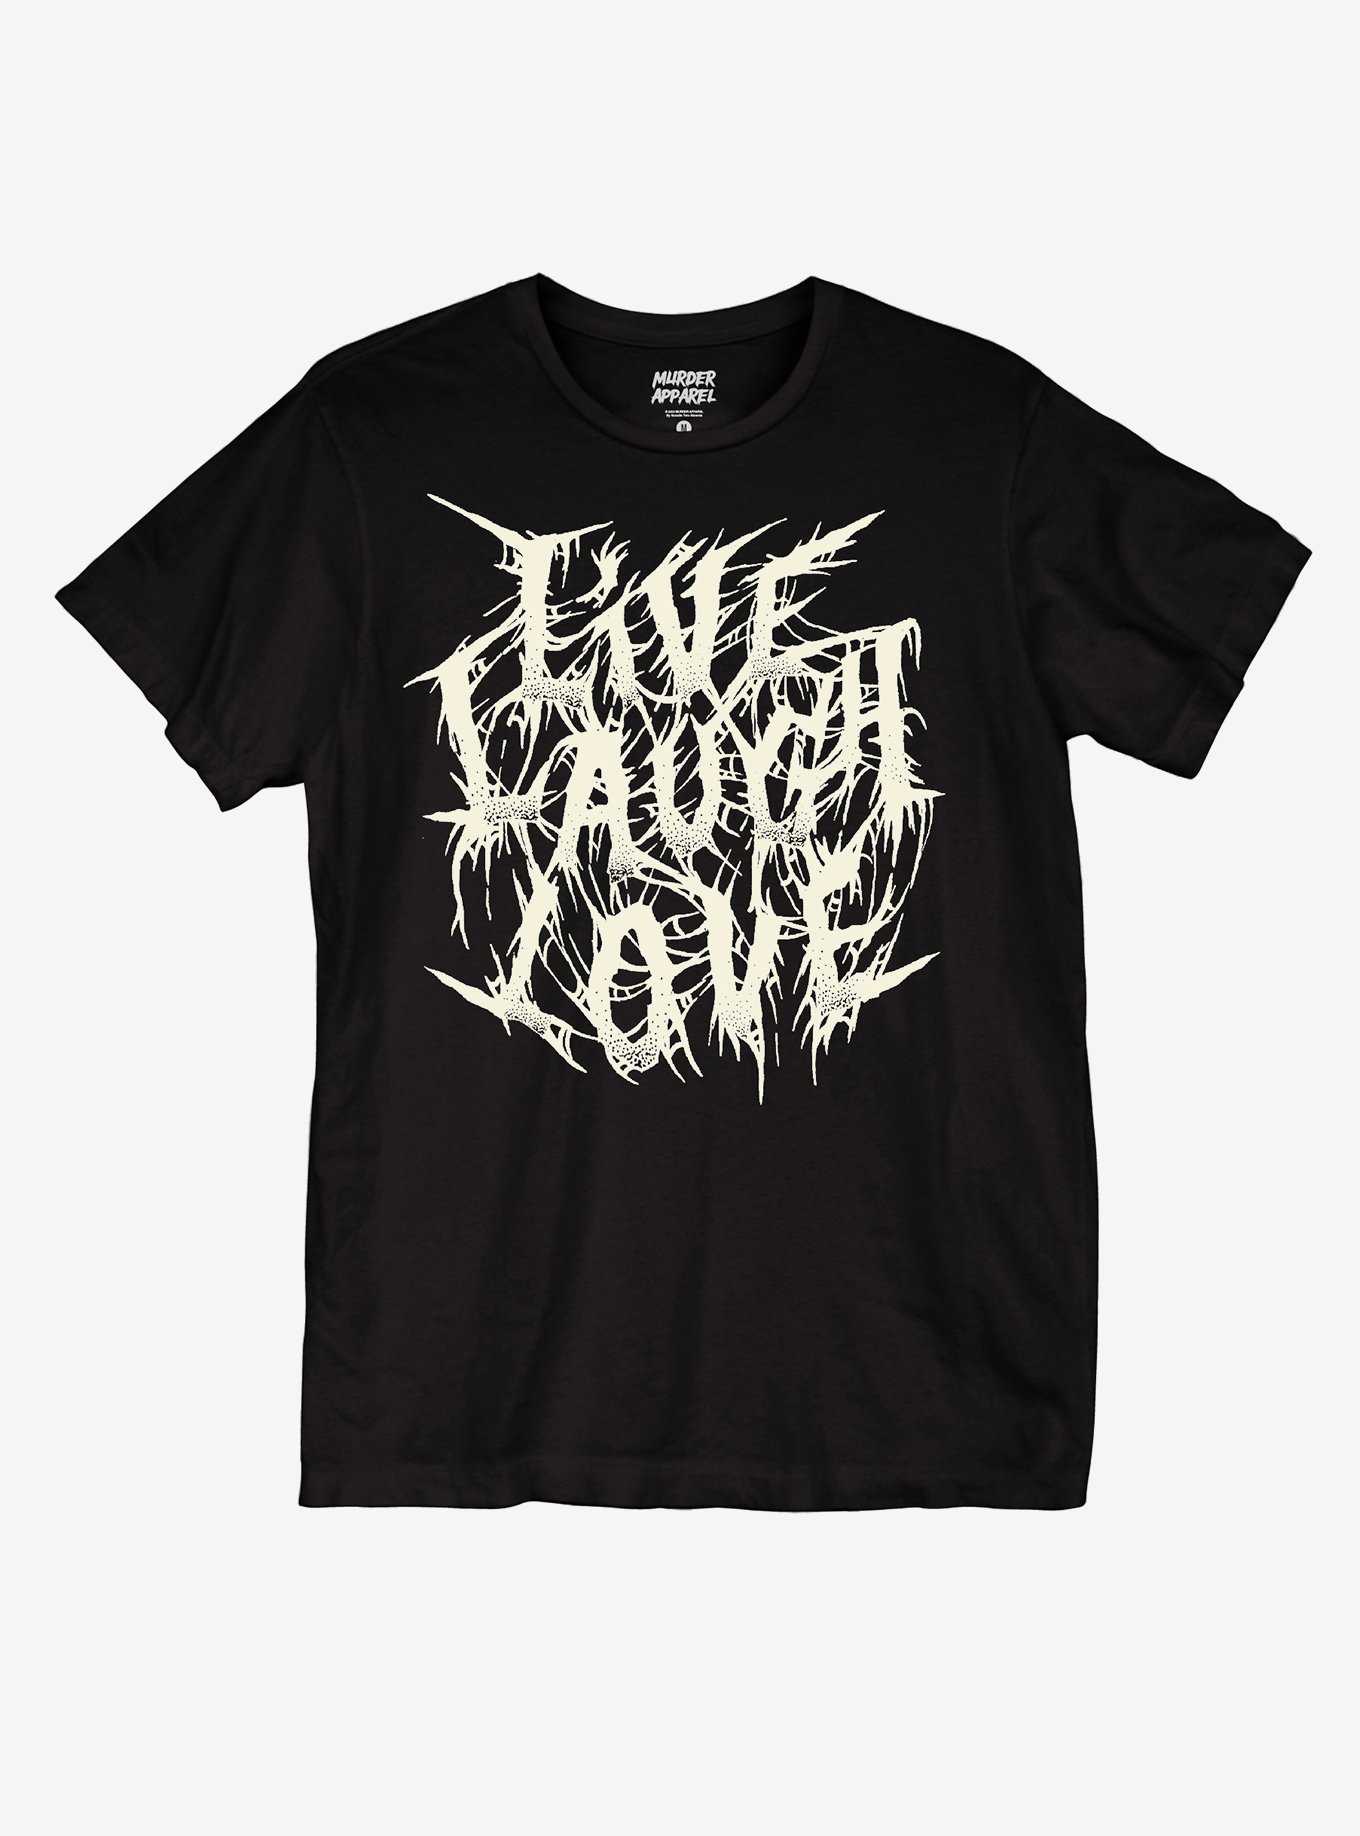 Twisted Live Laugh Love T-Shirt By Murder Apparel, , hi-res